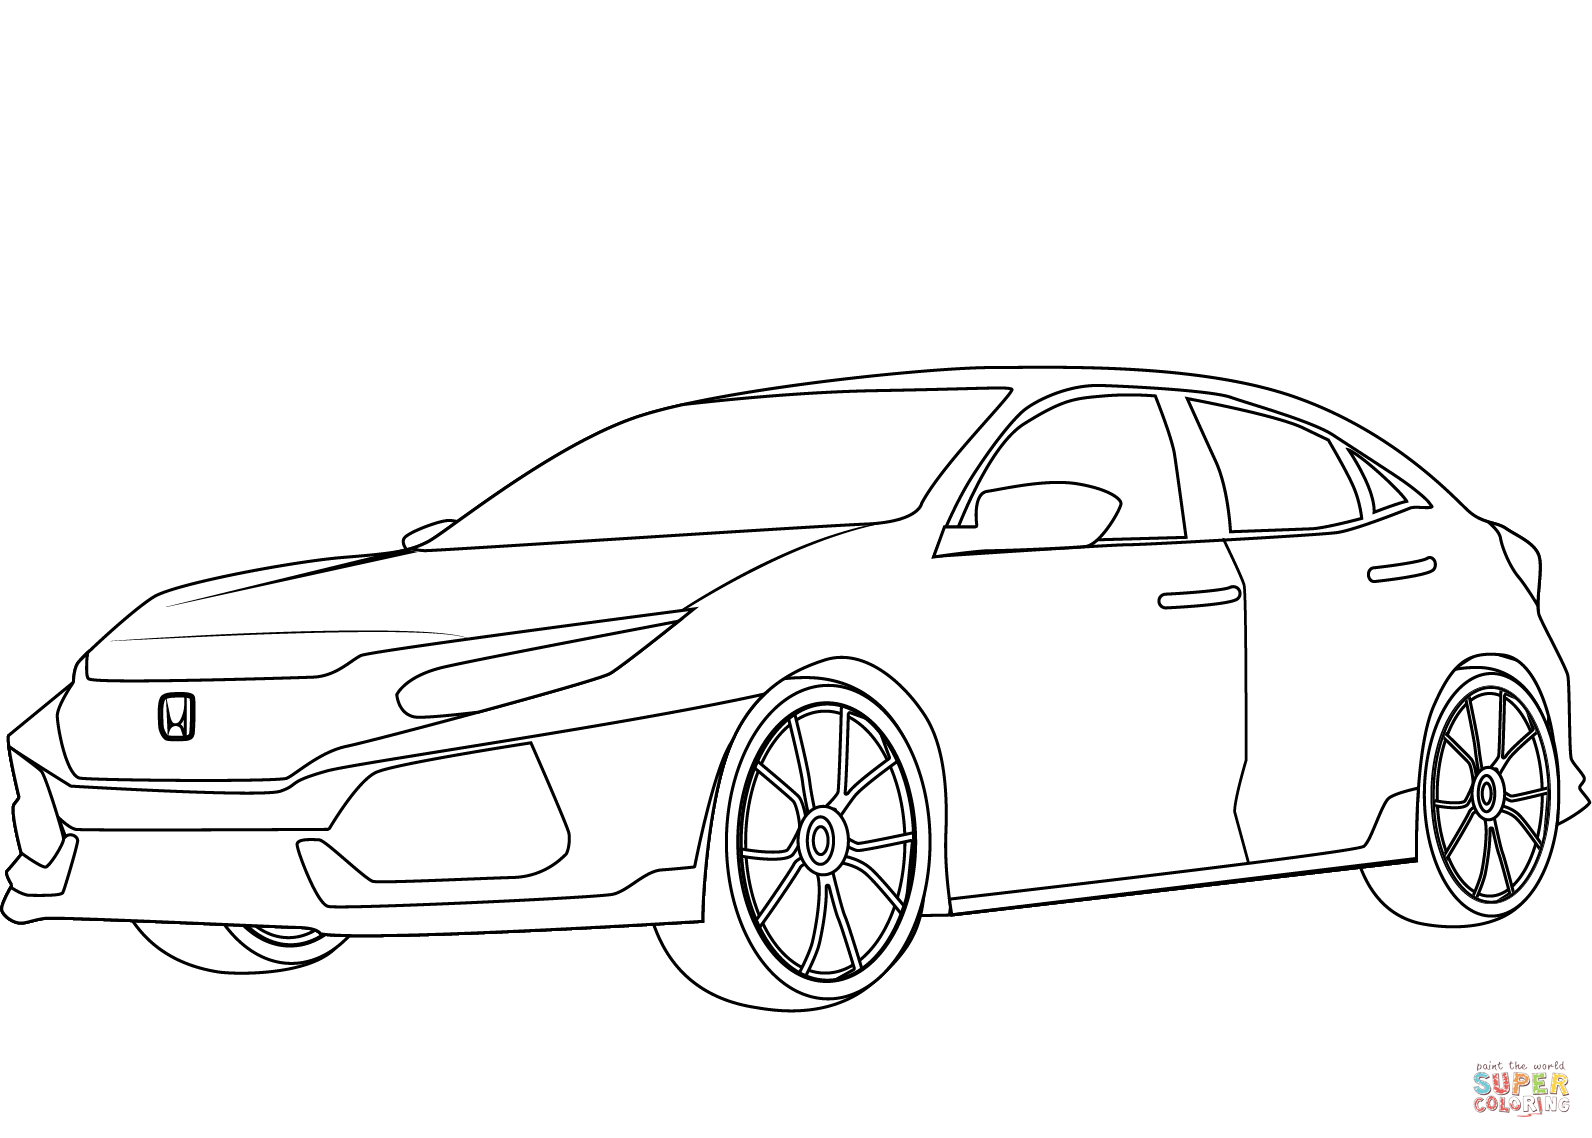 Honda civic type r coloring page free printable coloring pages